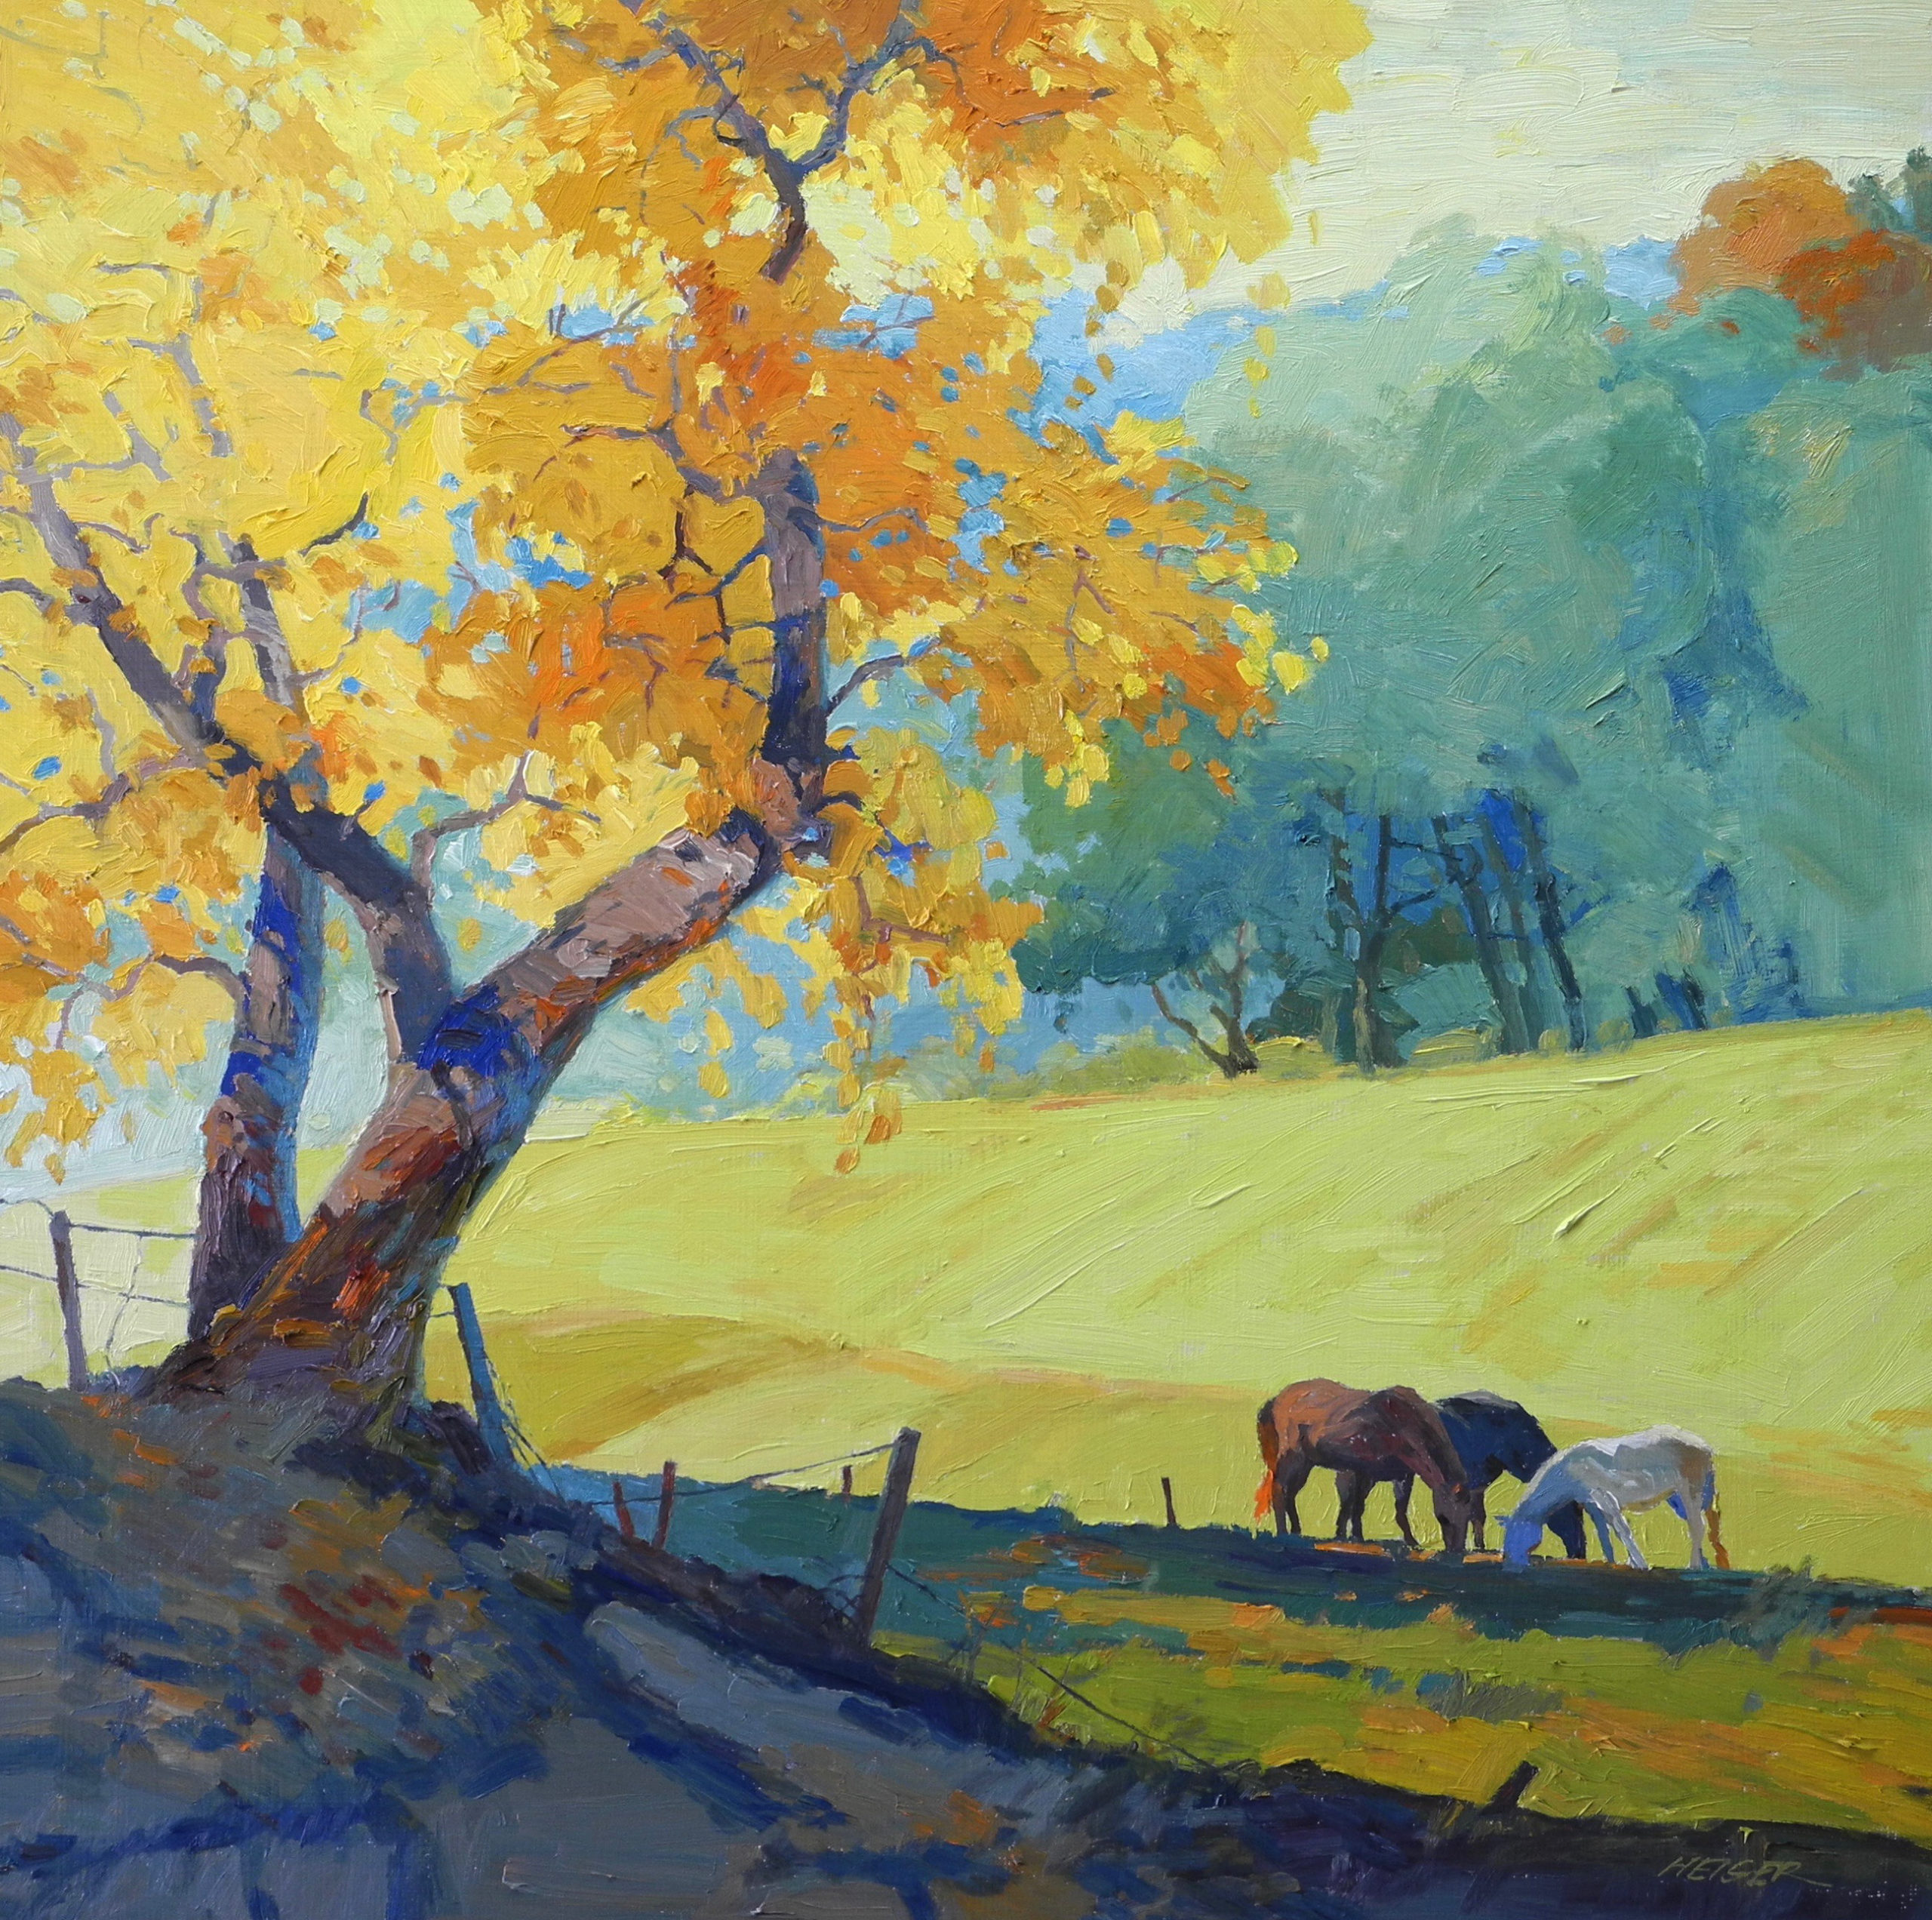 Fall Just Happens, 24 x 24 - Sold